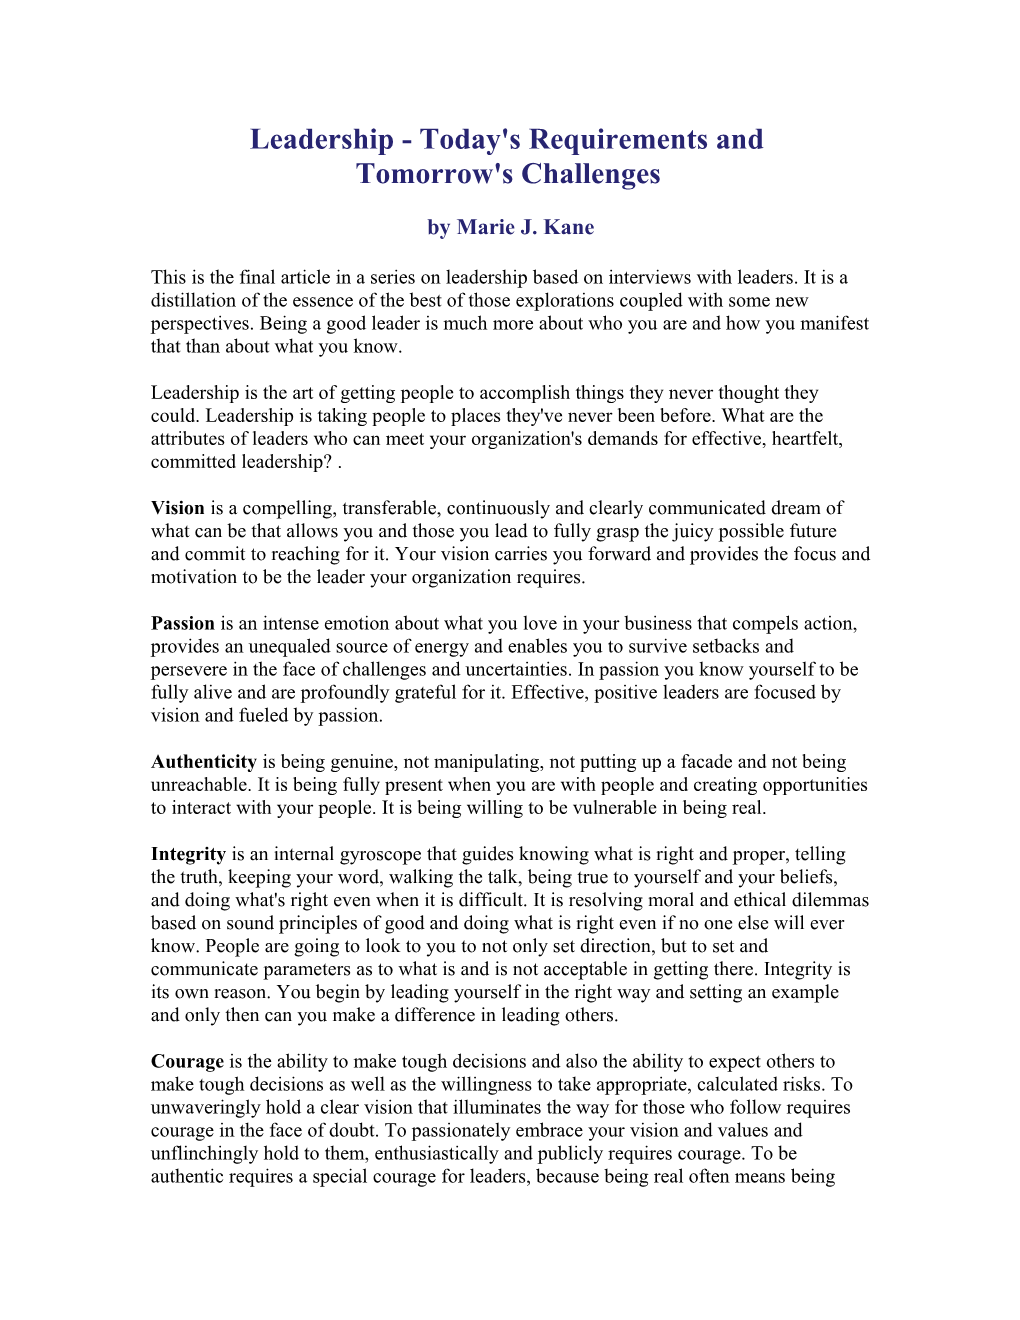 Leadership - Today's Requirements And